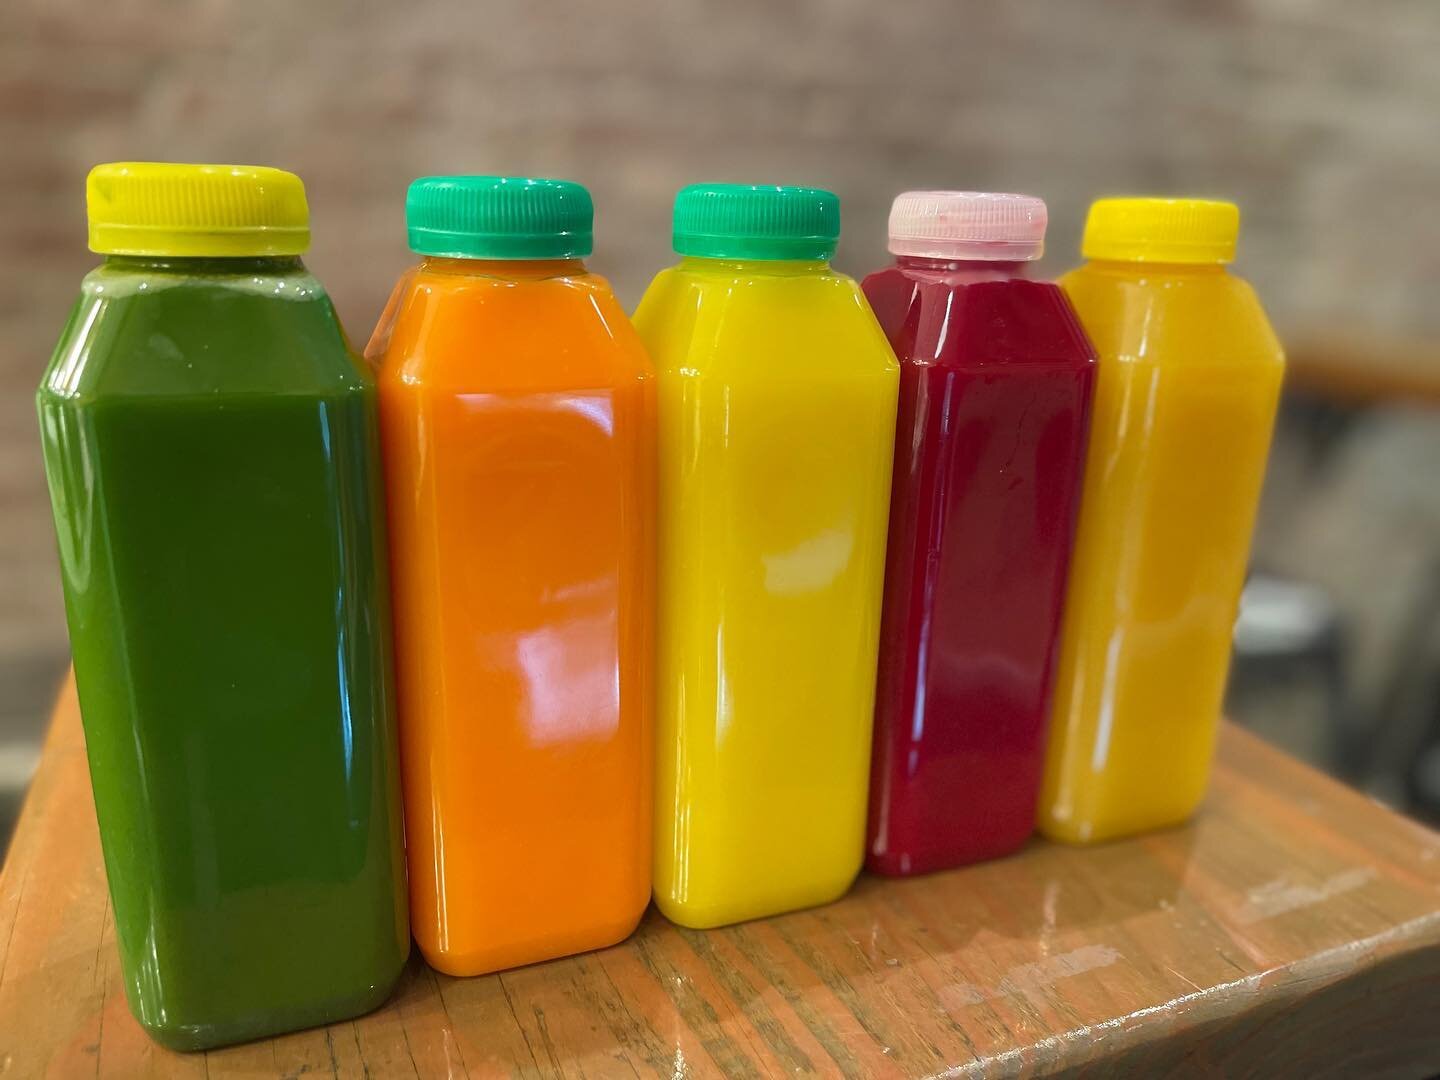 Cold-Pressed Juices ready to go! Come stop by or Order Online here on our IG Page

#nyc #foodie #instagood #yum #lunch #dinner #wraps #nyceats #juice #smoothie #fresh #smoothiebowl #salad #coldpressedjuice #eats #sandwich #chefsofinstagram #catering 